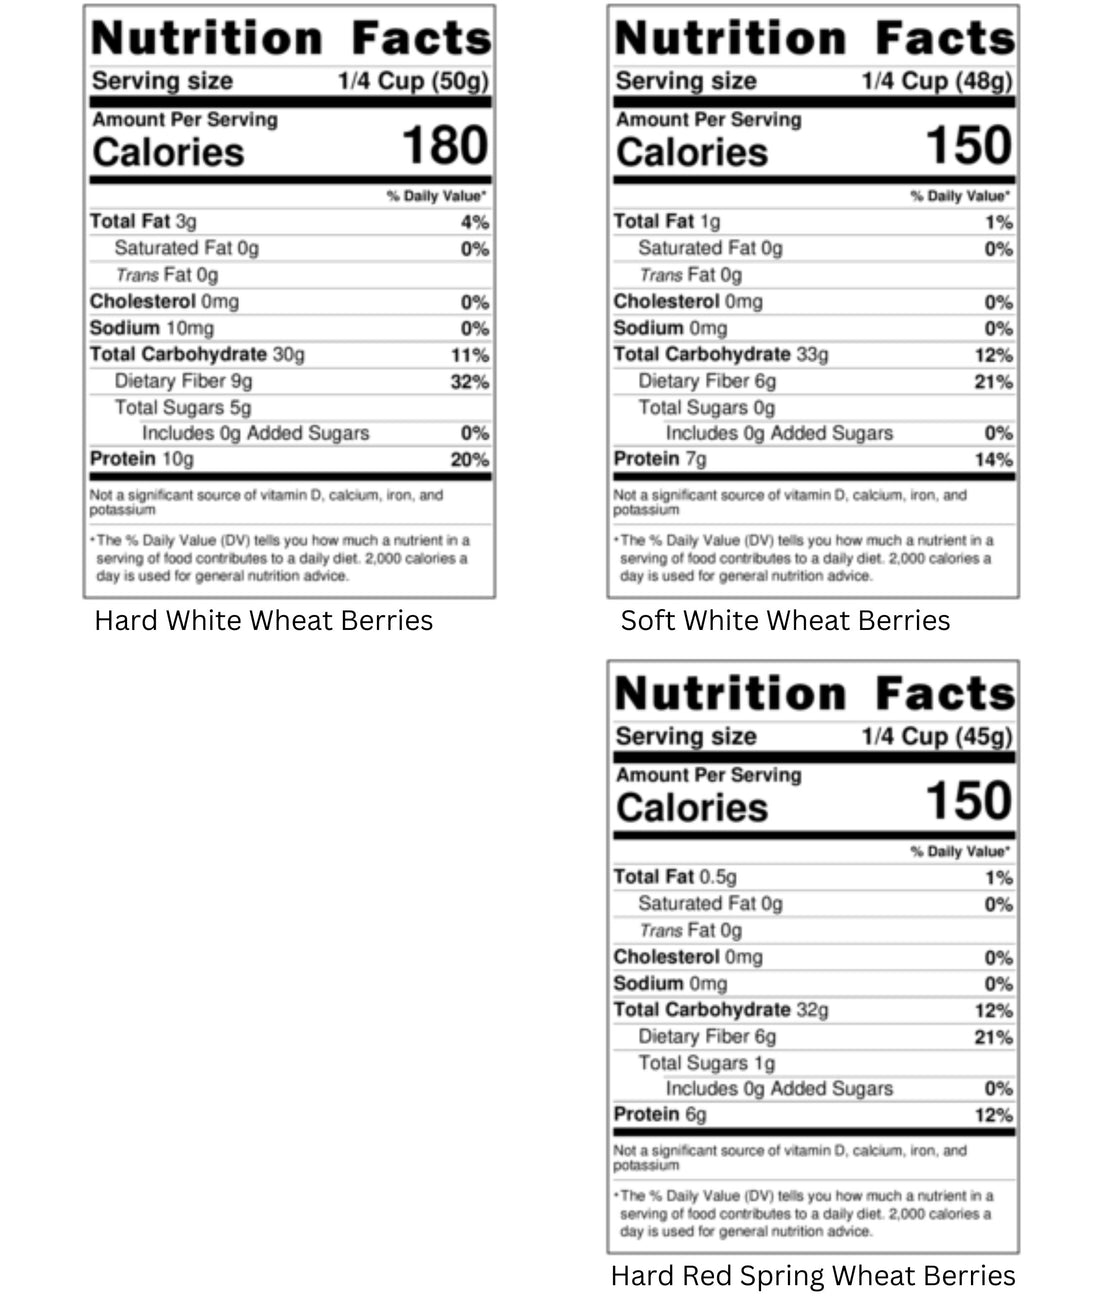 Nutrition Facts for Washington State Grown Hard White Wheat, Soft White Wheat and Hard Red Spring Wheat Berries